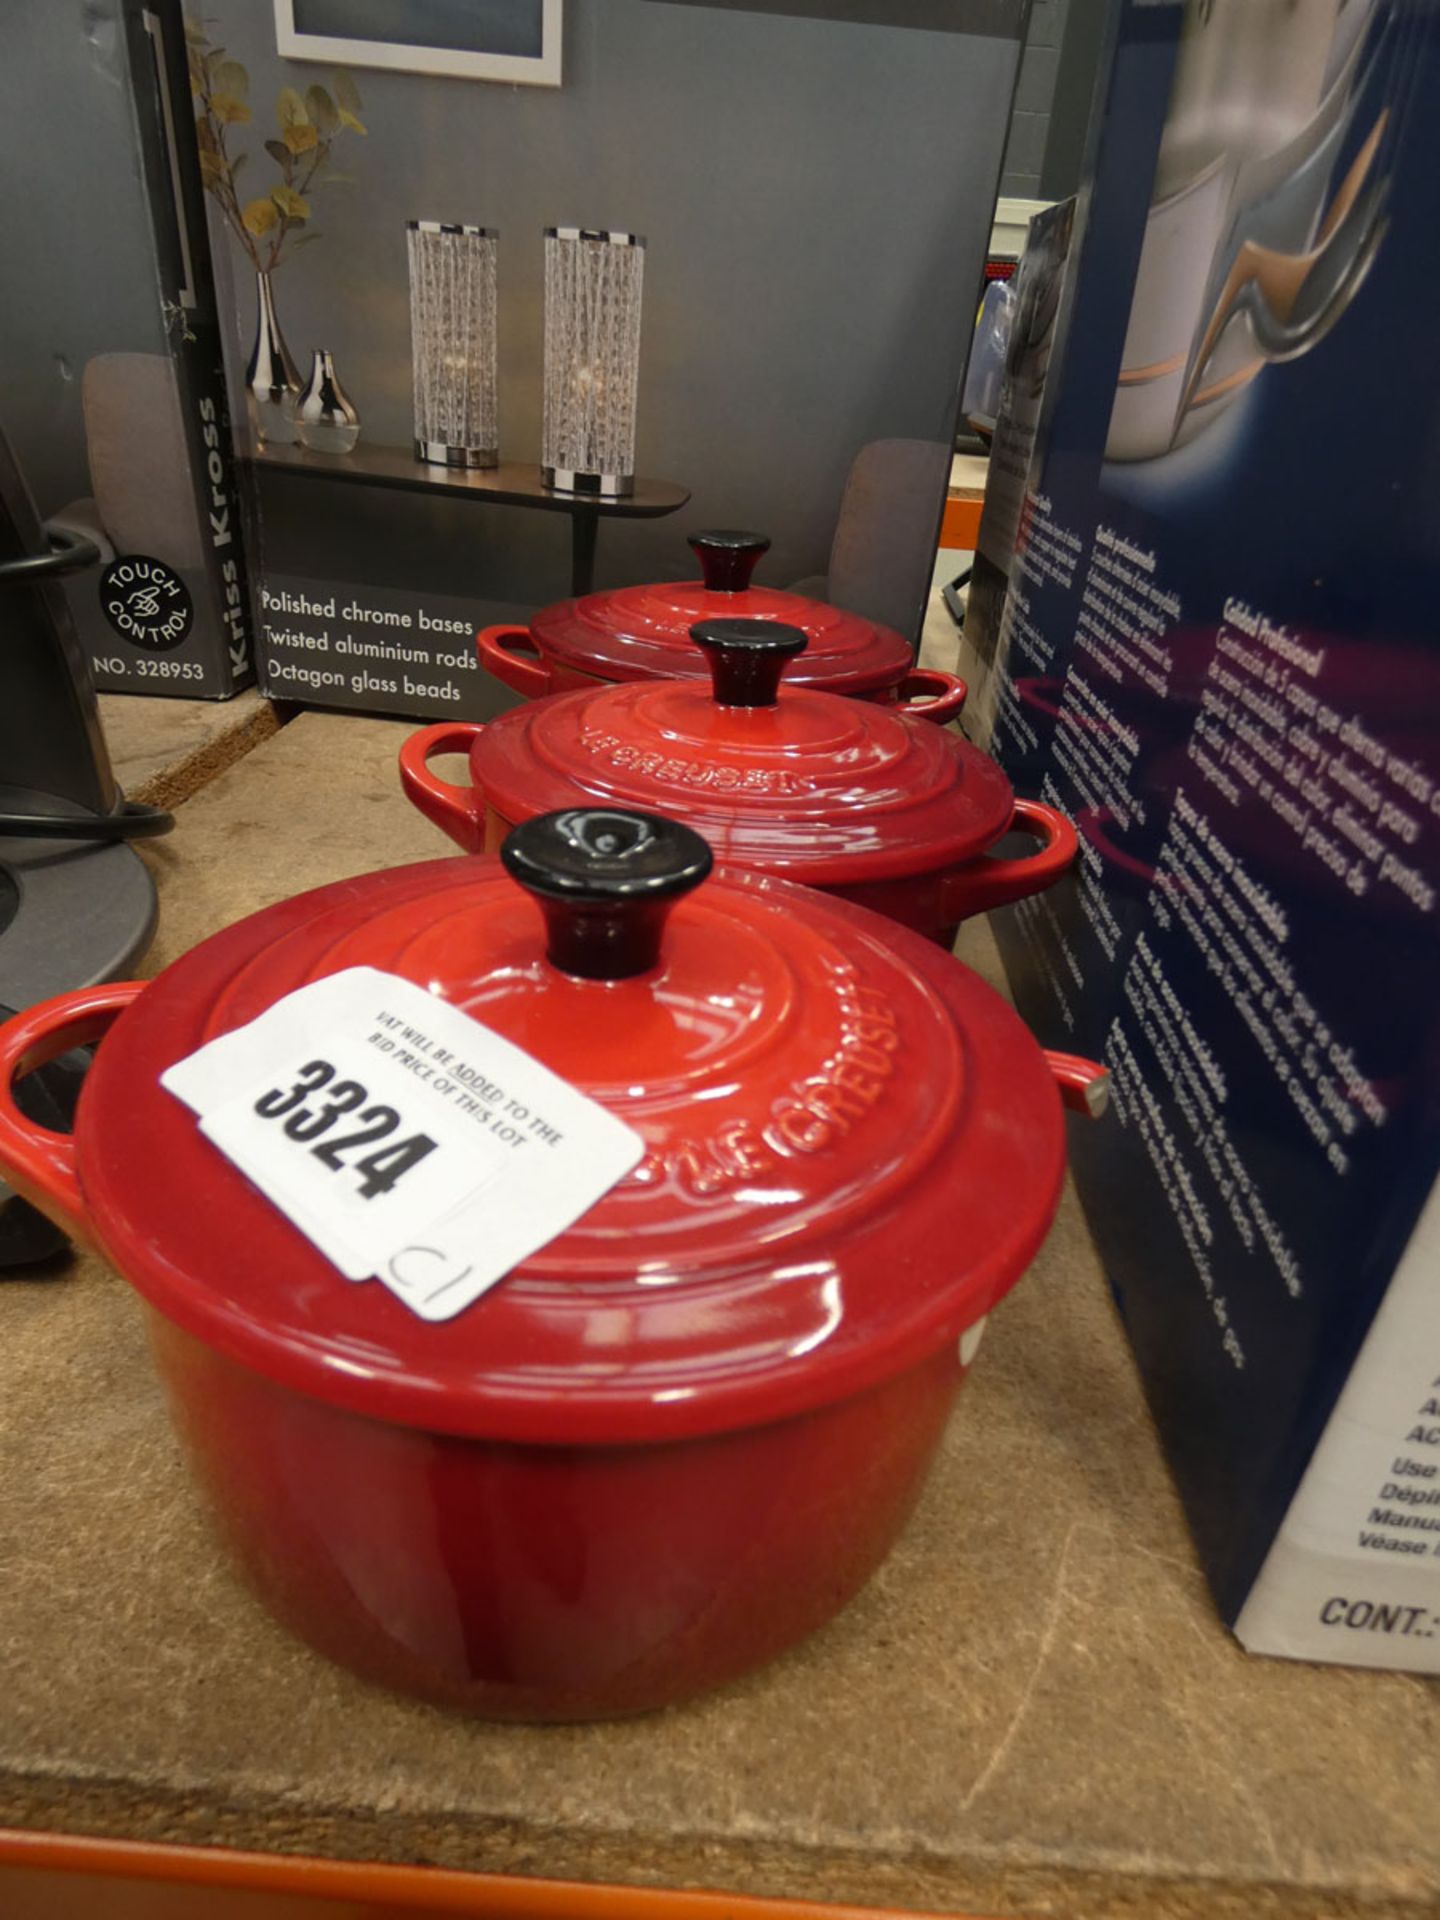 3129 - 3 Le Creuset small cooking pots (one missing handle)